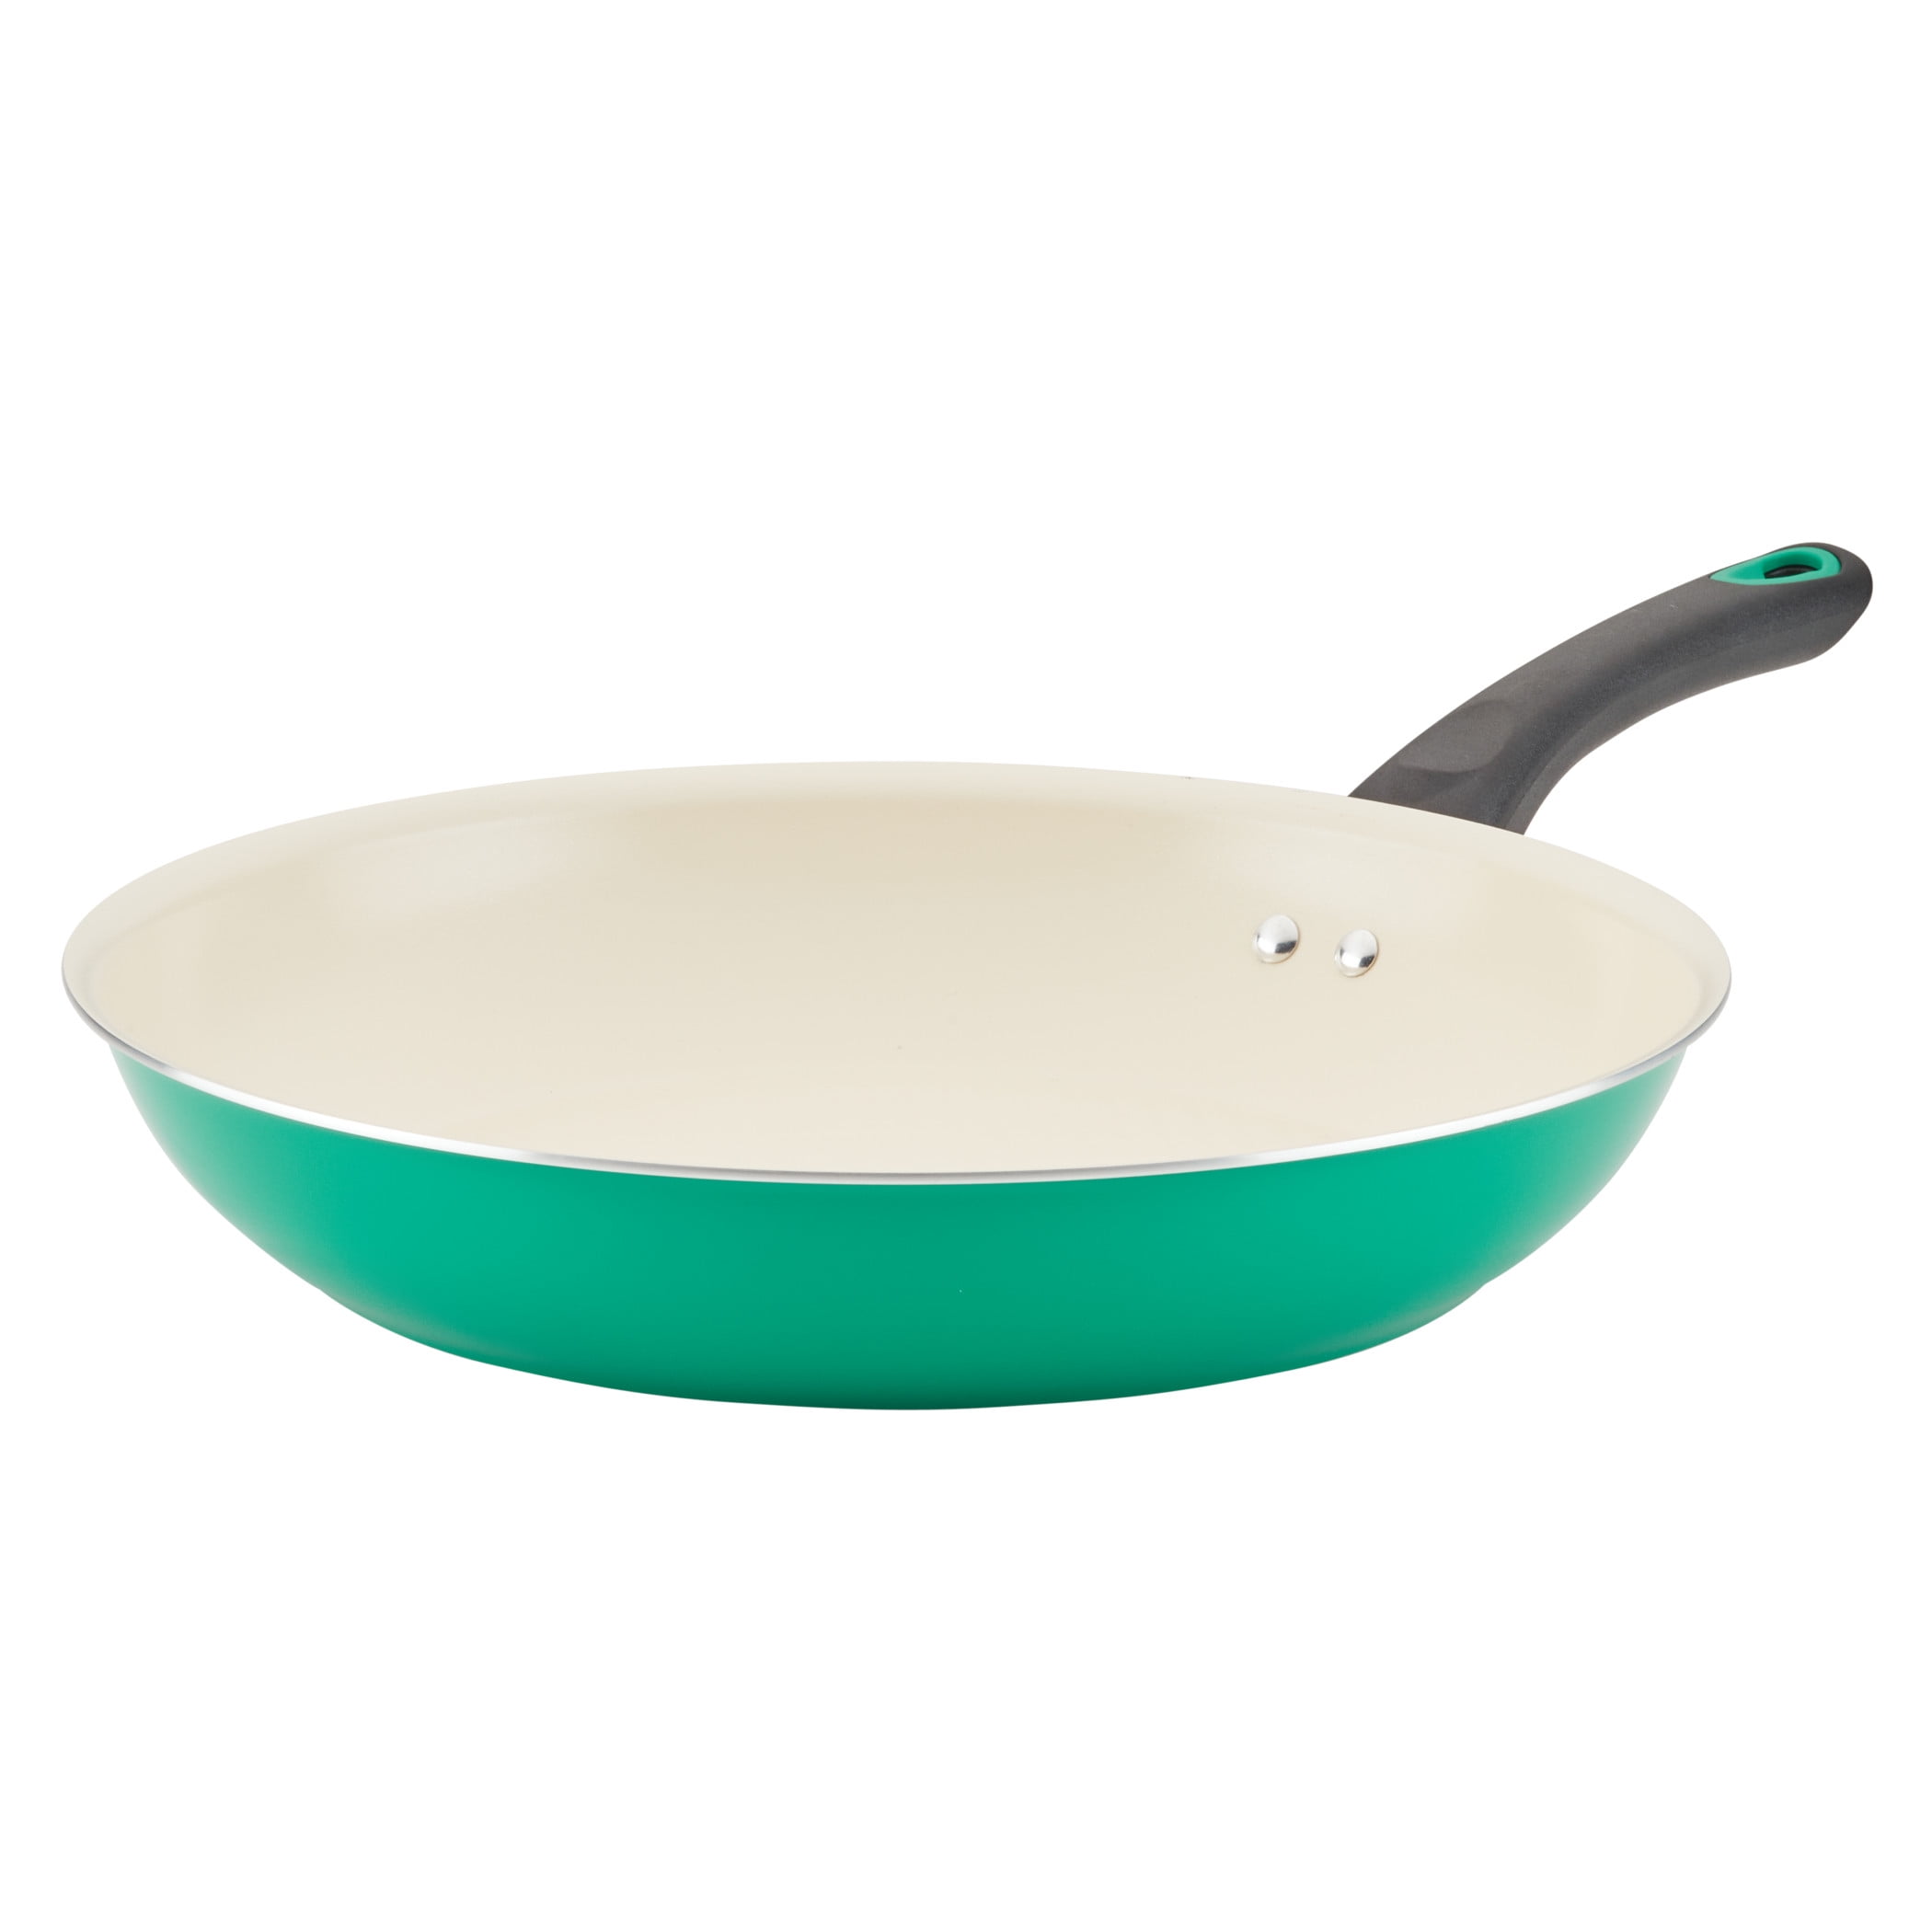 Go Healthy! by Farberware 12.5-inch Nonstick Frying Pan with Quiltsmart Technology, Green